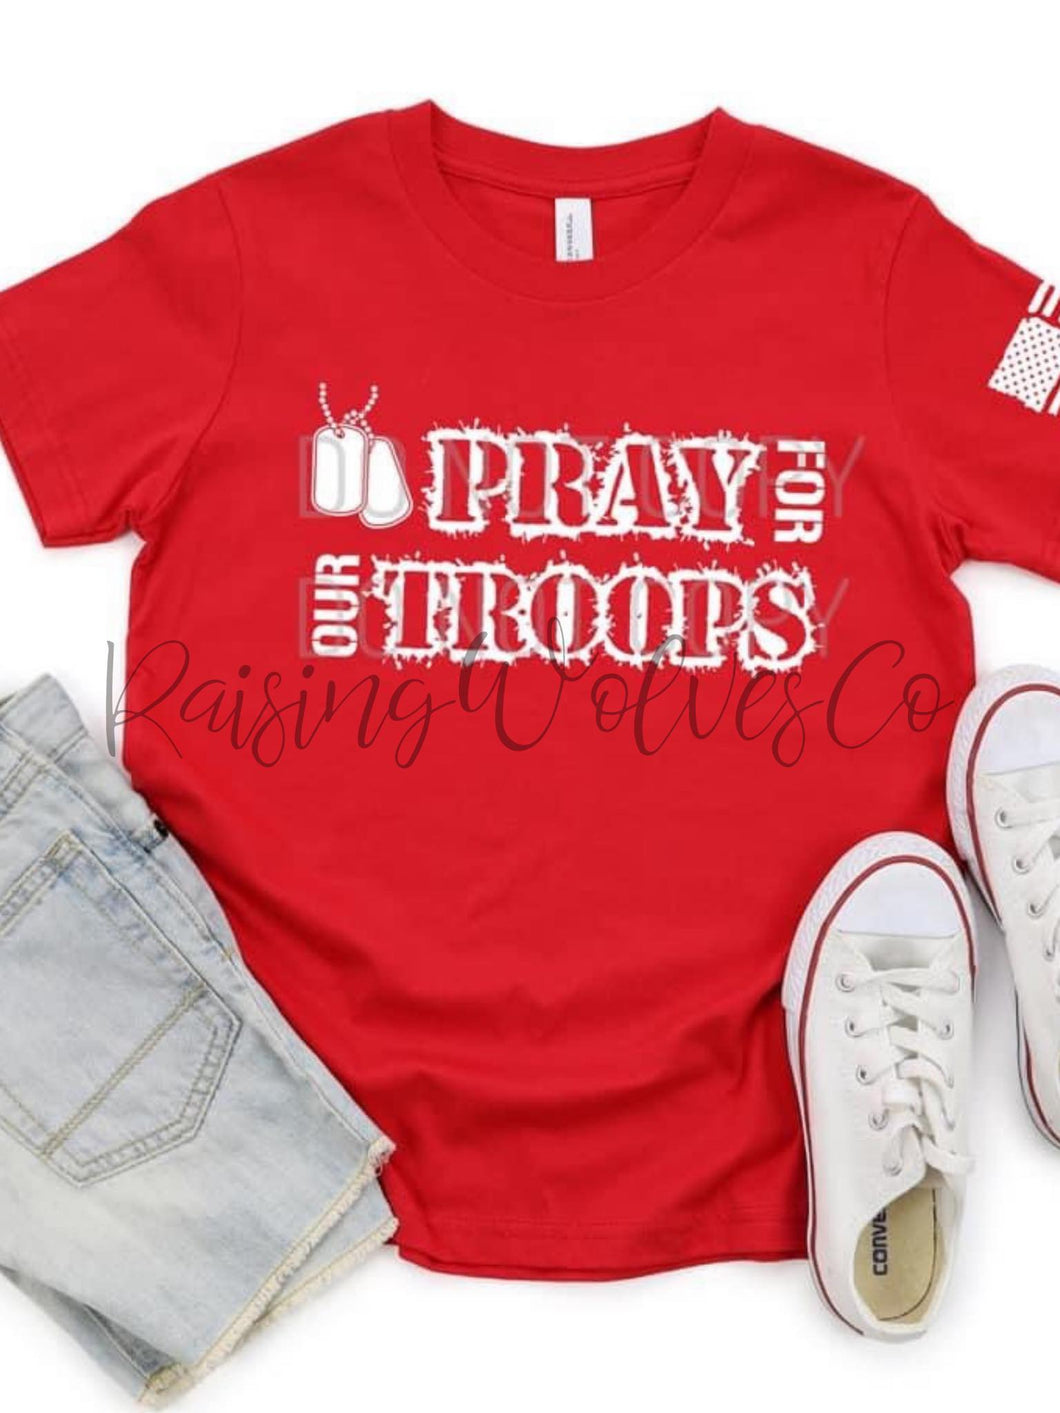 Pray for Our Troops- All profits donated to Military Charity